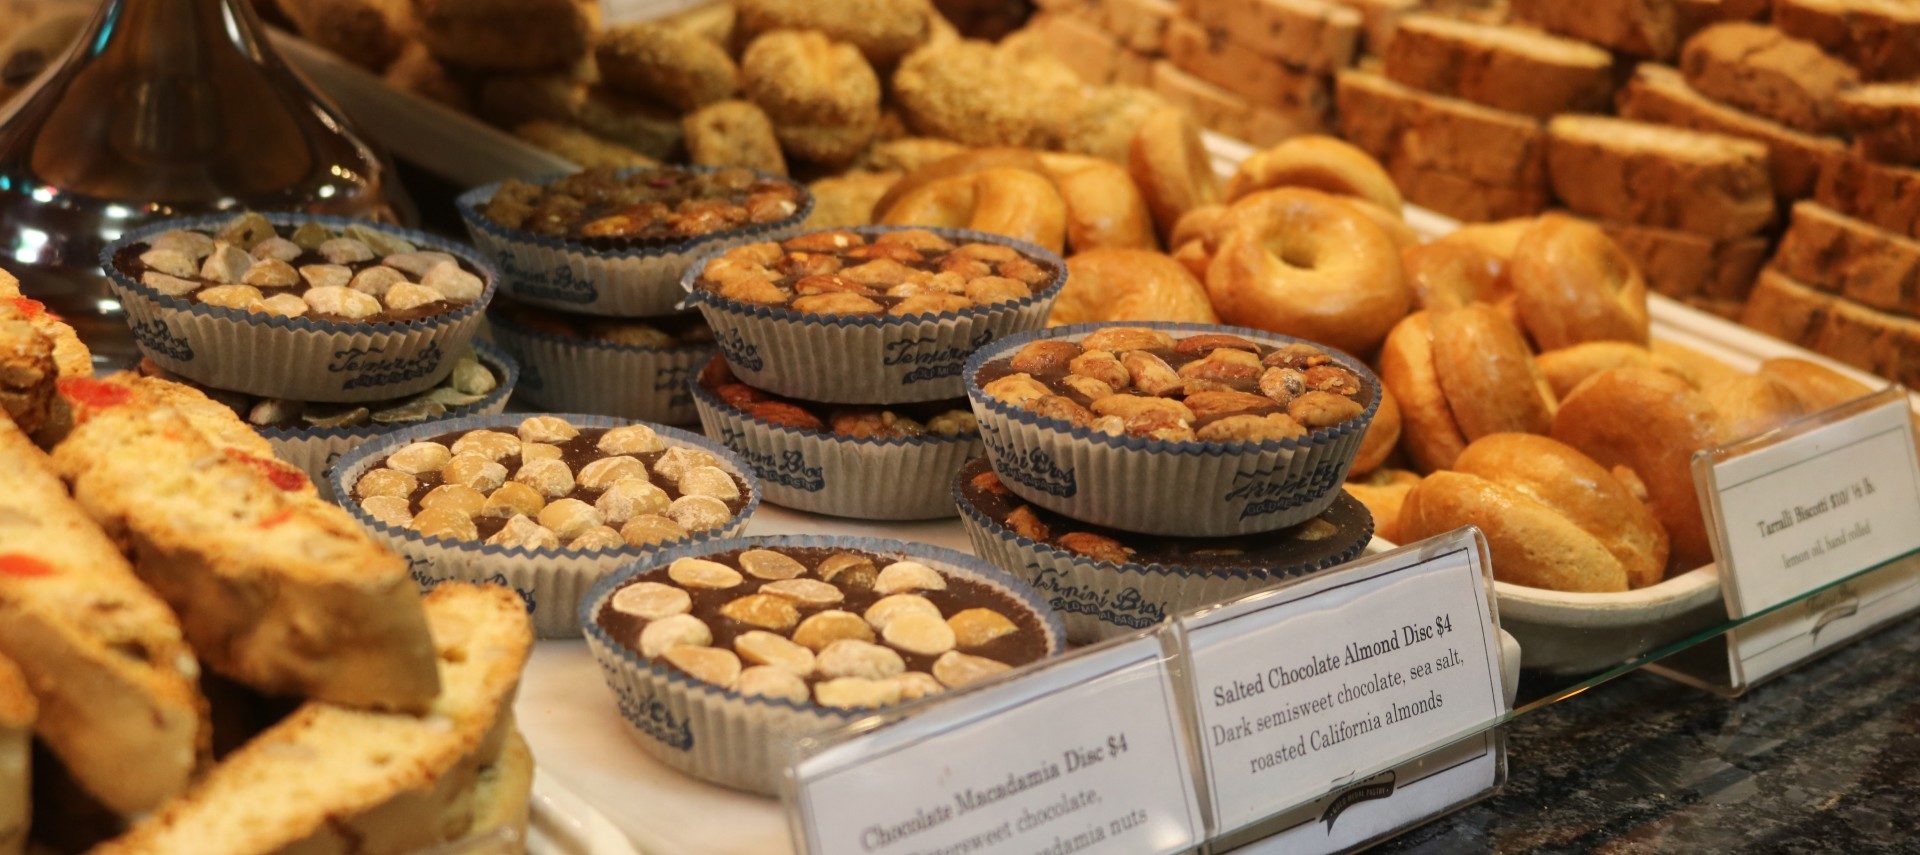 Display case full of delicious baked goods including bagels, tarts and breads